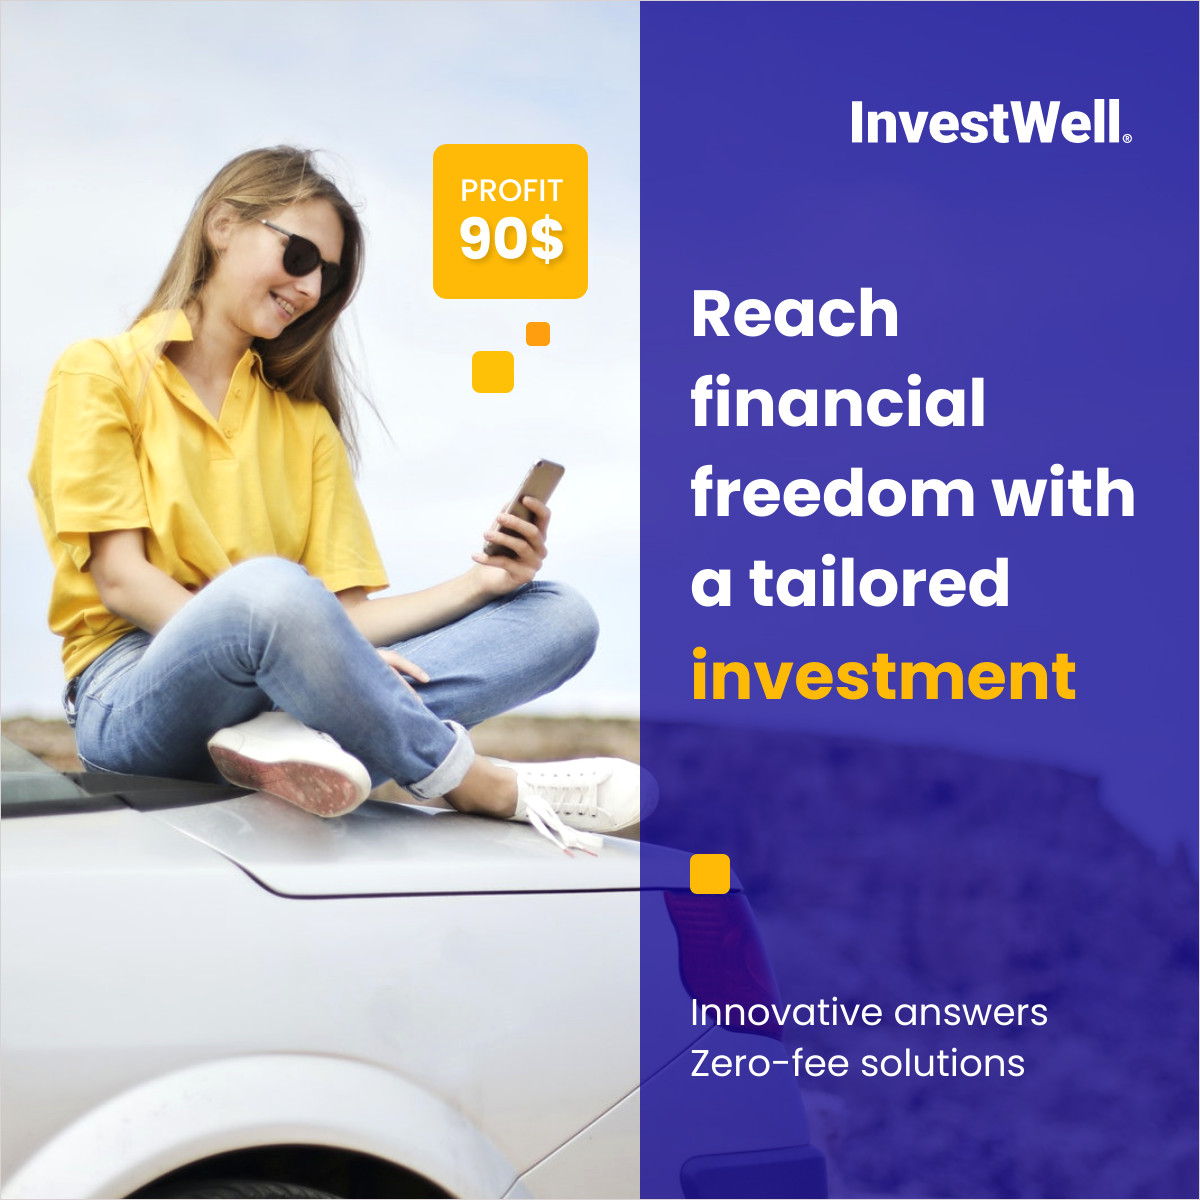 Financial Freedom with InvestWell